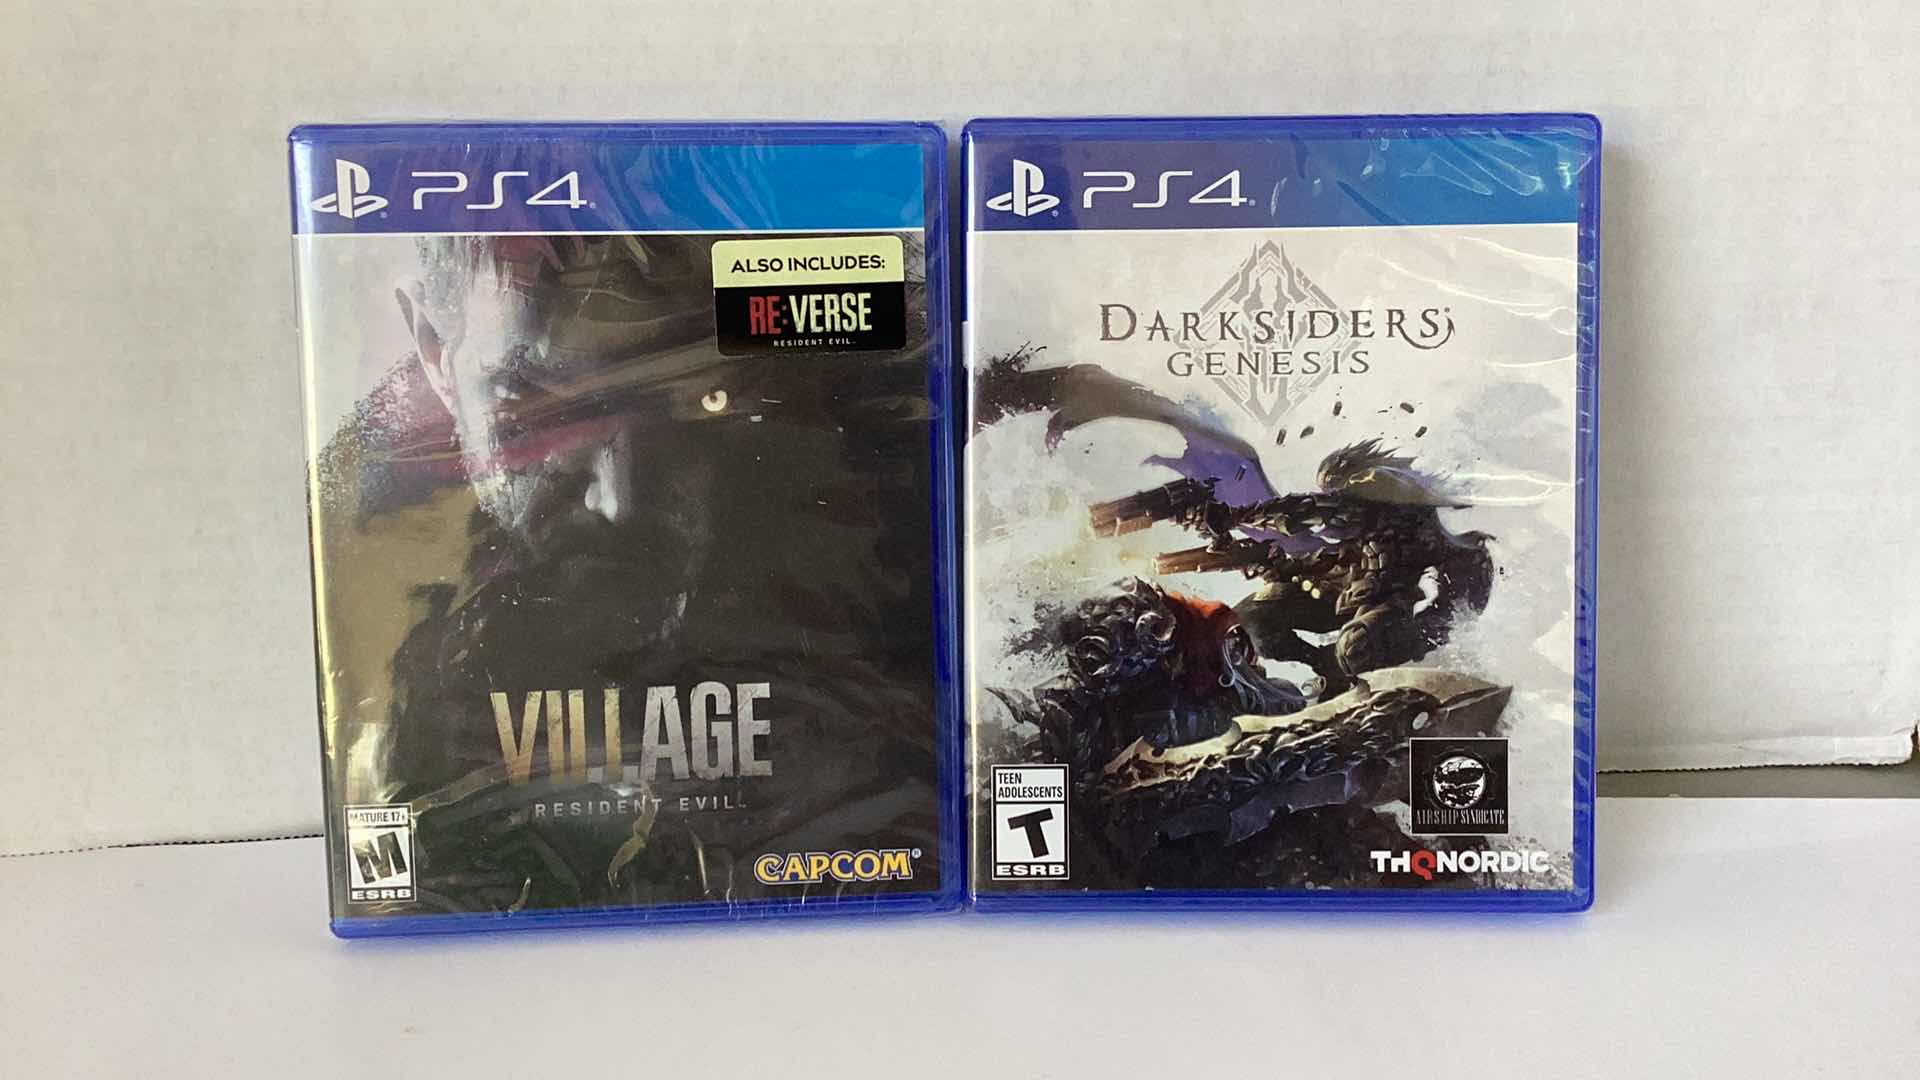 Photo 1 of 2 NEW PS4 GAMES: RESIDENT EVIL VILLAGE AND DARKSIDERS GENESIS